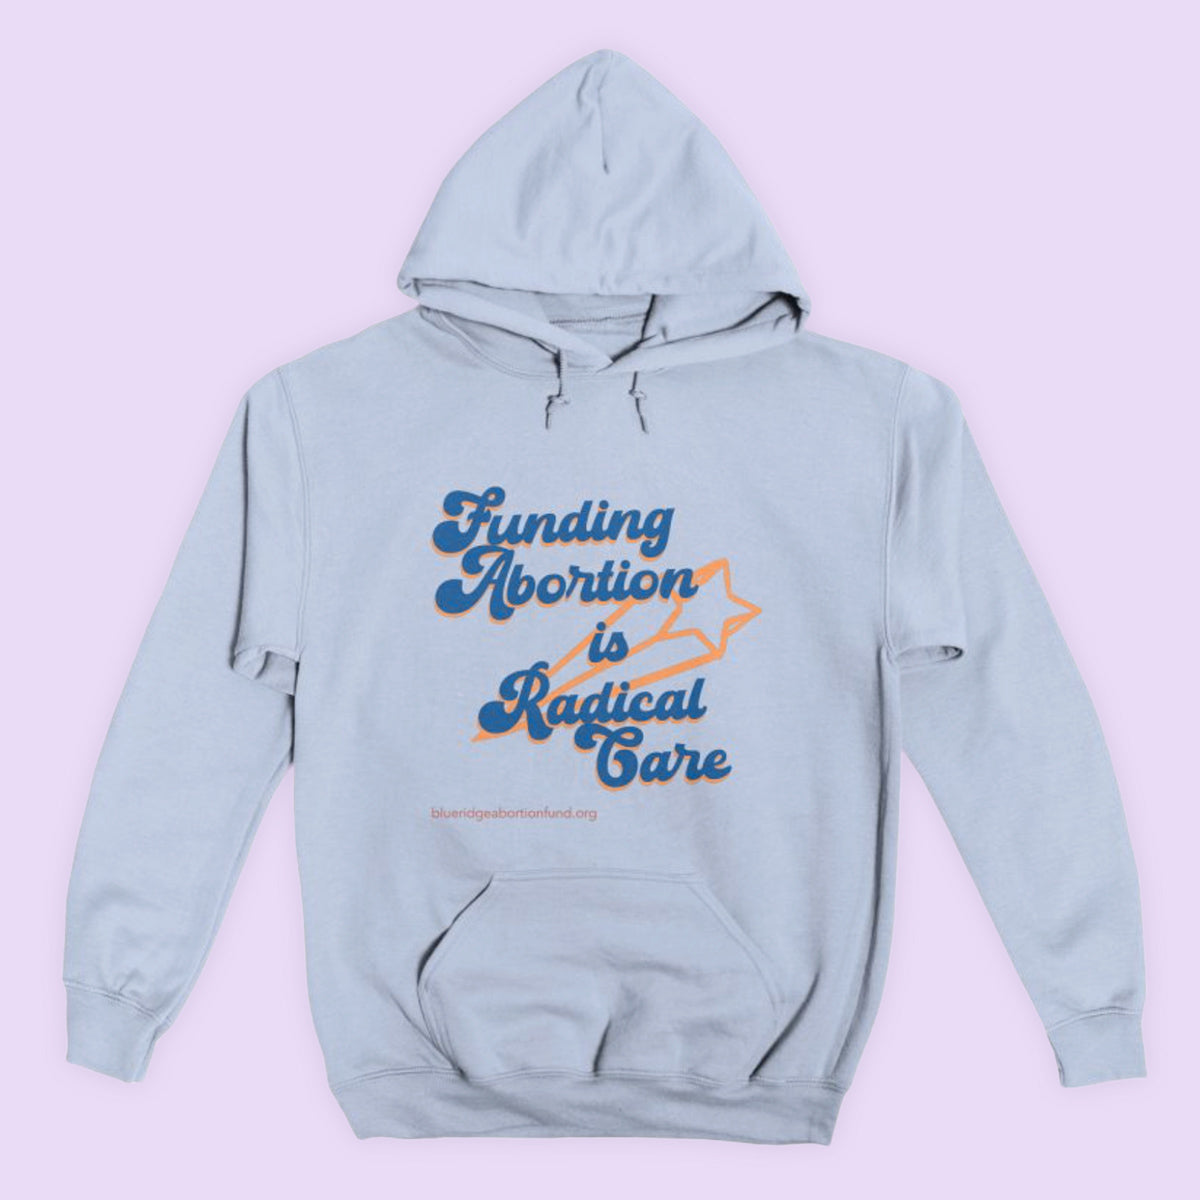 A sky blue pullover hoodie imprinted with a retro, 